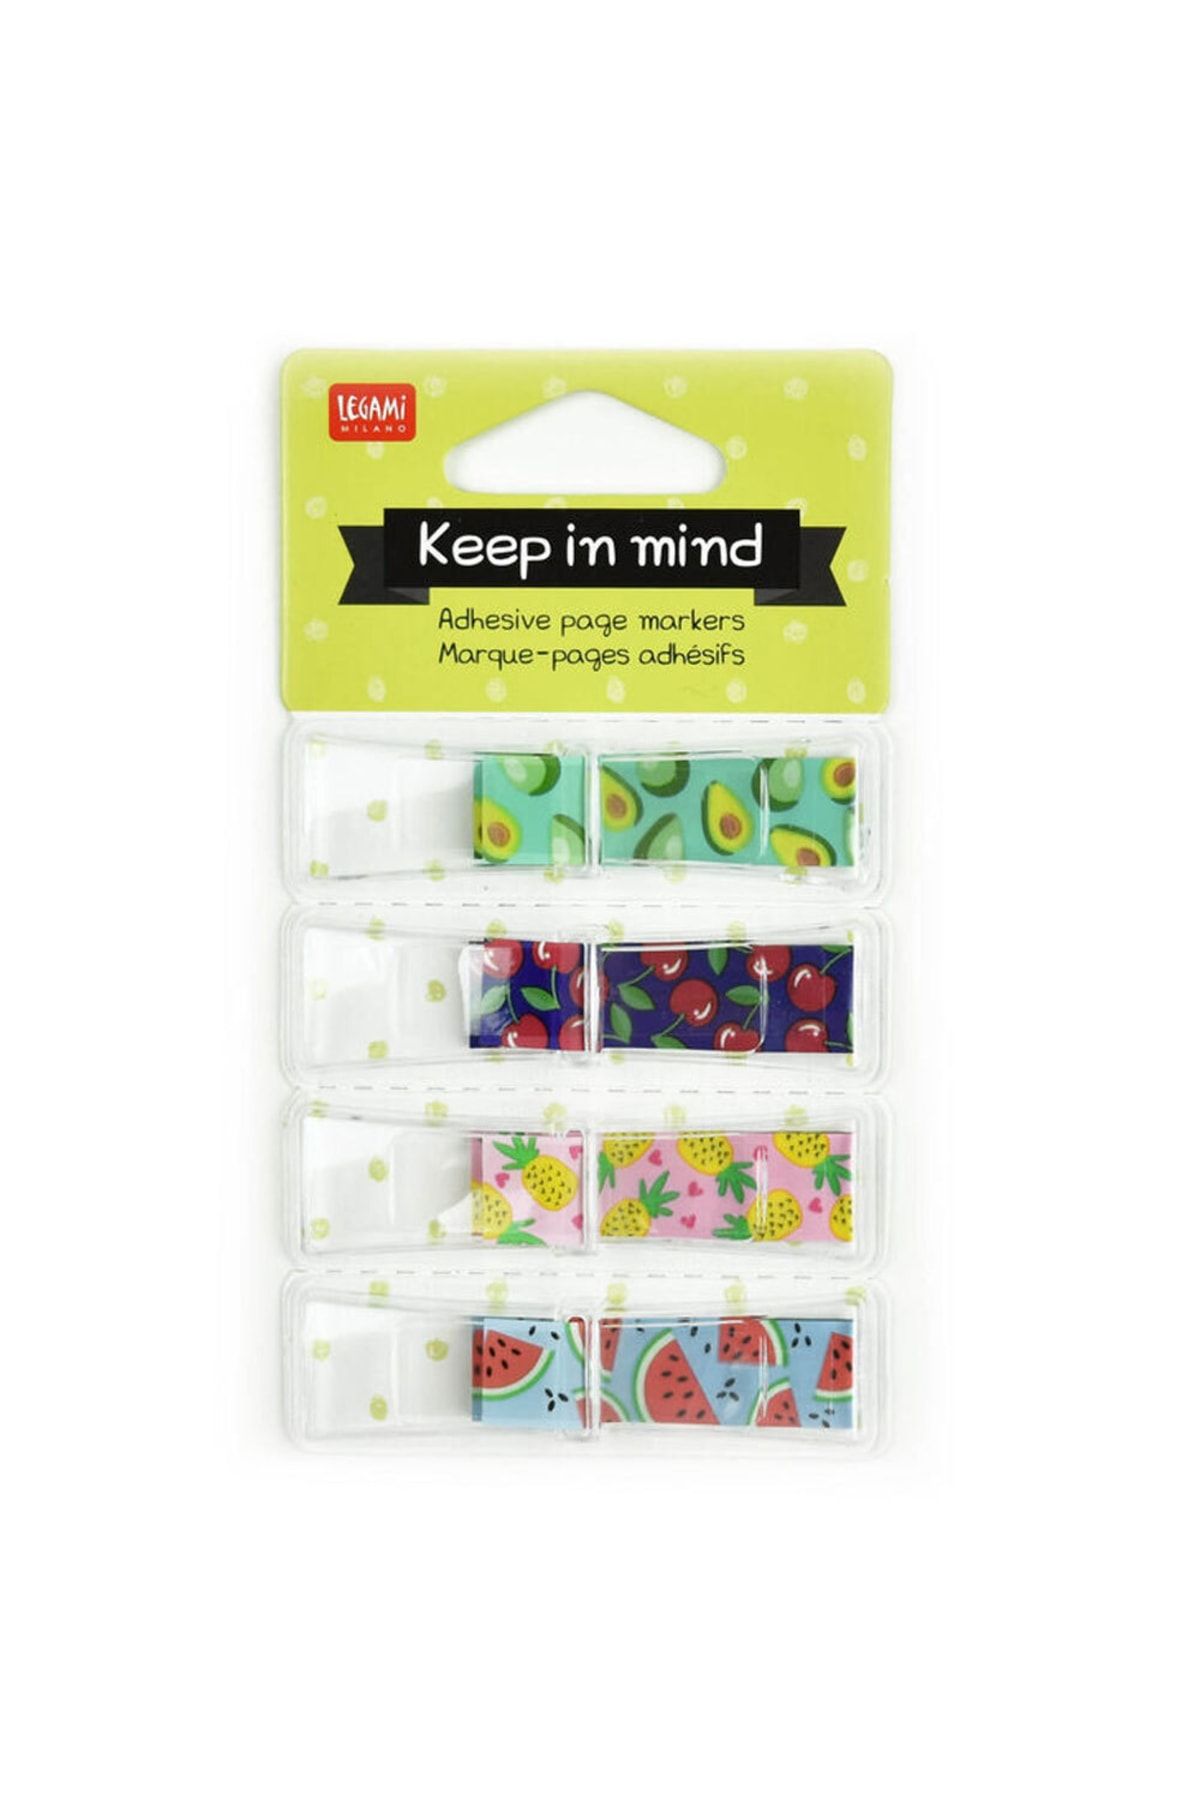 Legami Keep In Mind Page Markers Meyveler K088528